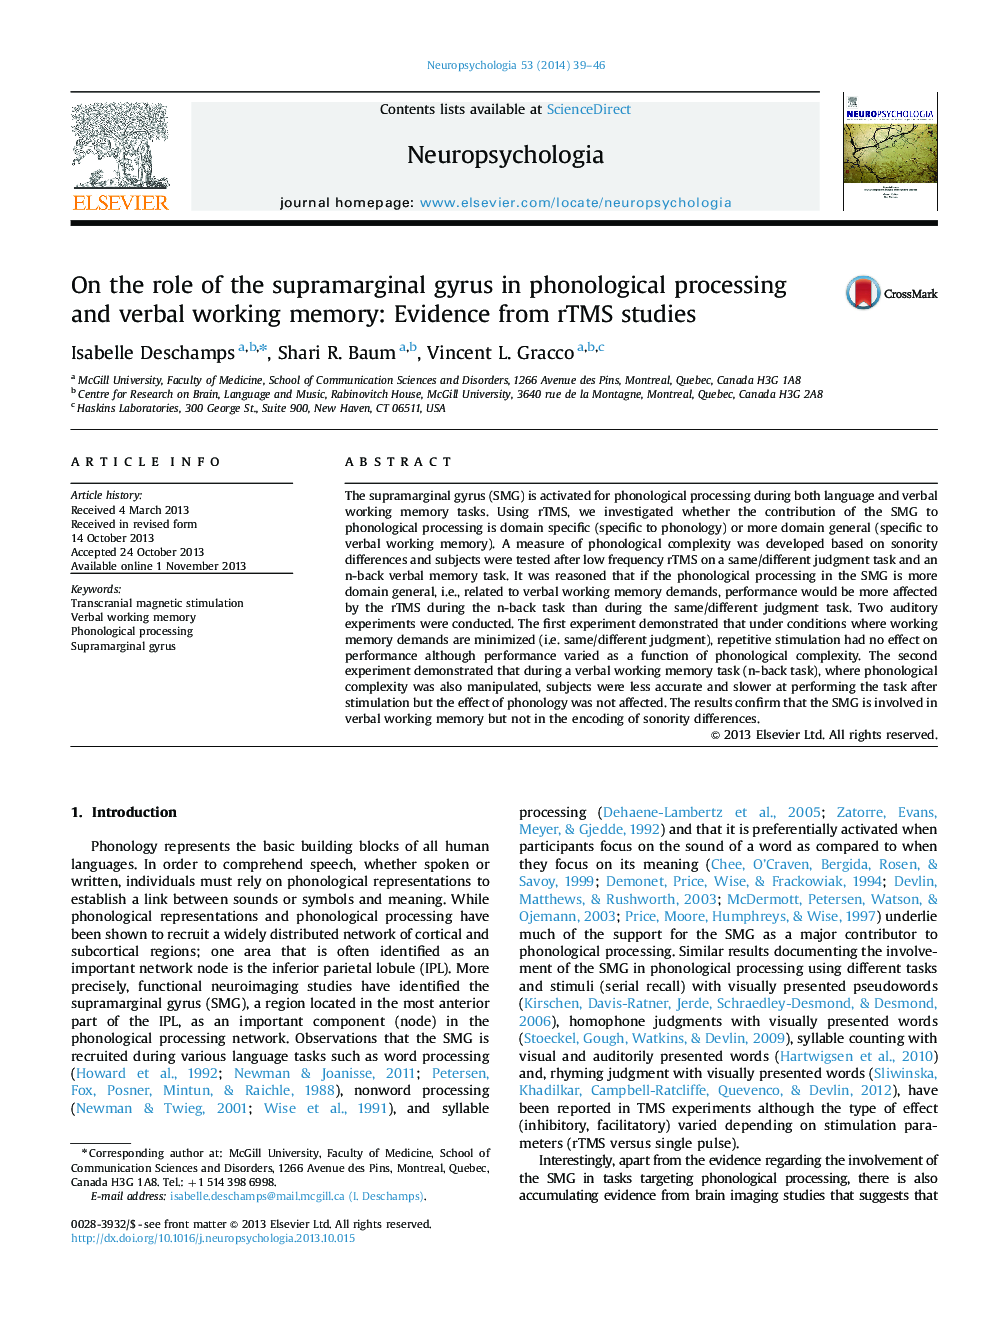 On the role of the supramarginal gyrus in phonological processing and verbal working memory: Evidence from rTMS studies